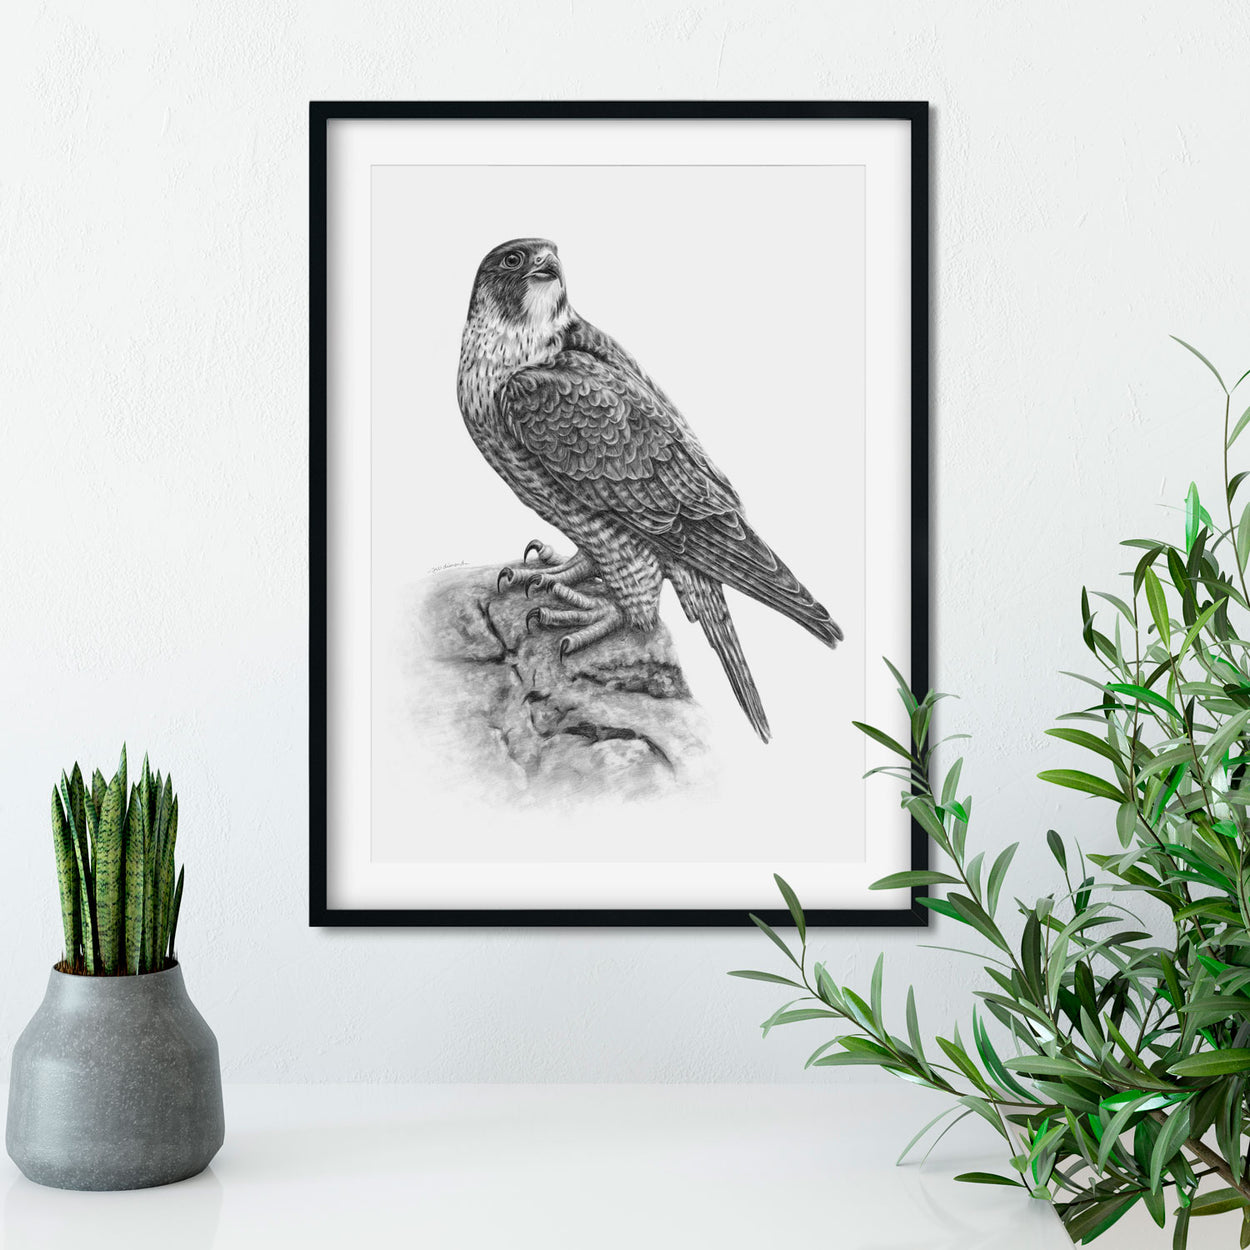 Original Peregrine Drawing on Wall - The Thriving Wild